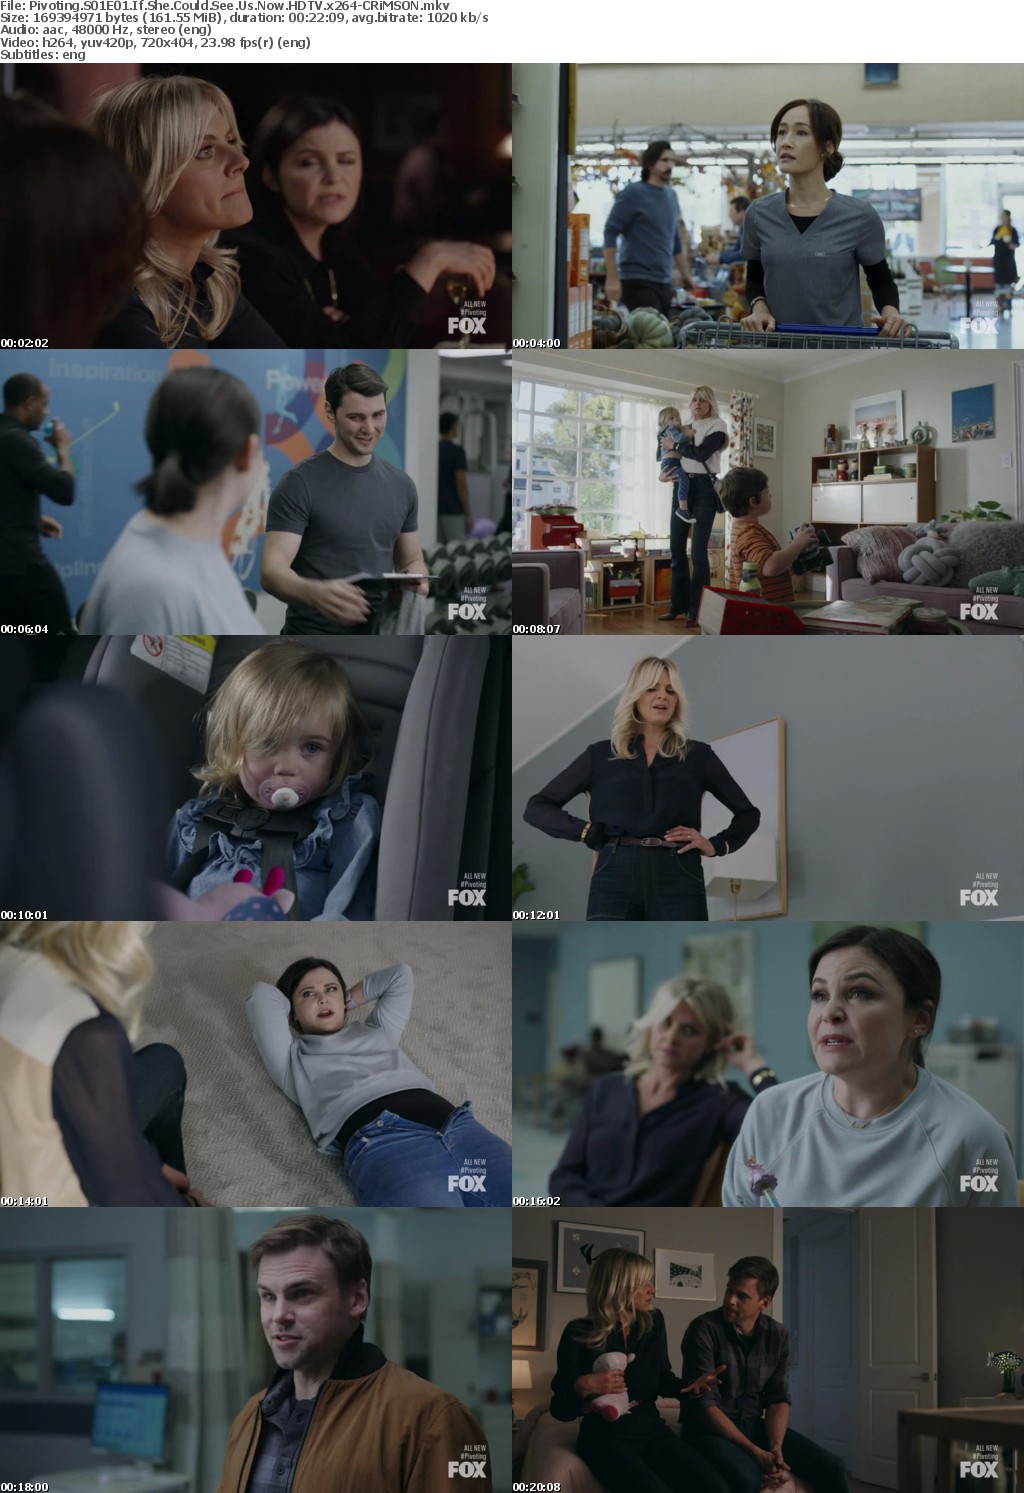 Pivoting S01E01 If She Could See Us Now HDTV x264-CRiMSON